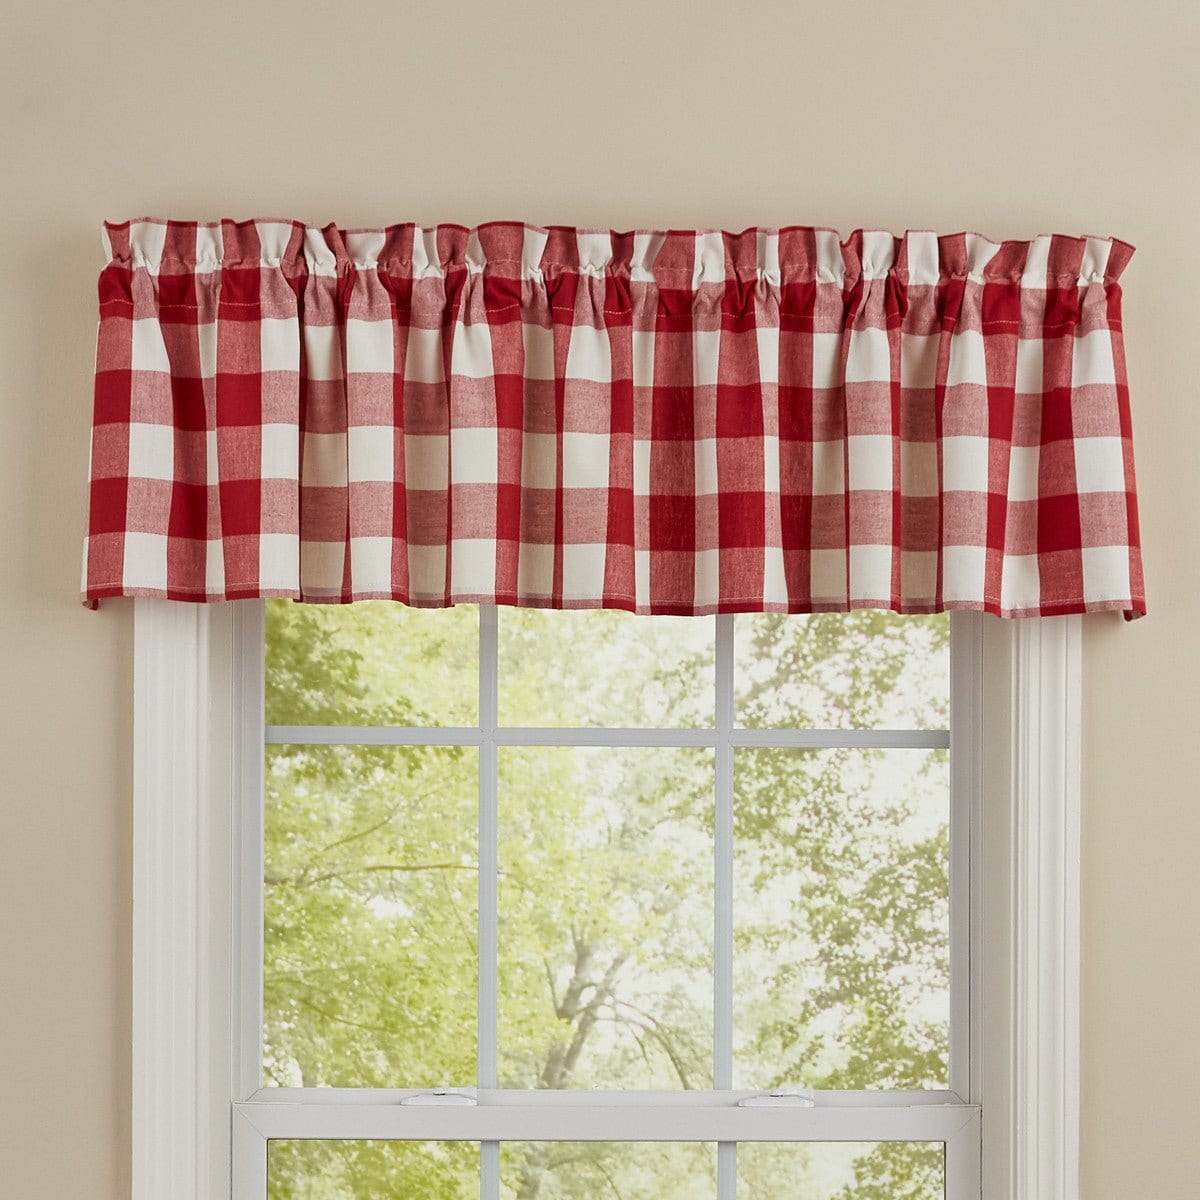 Wicklow Check in Red Valance Unlined-Park Designs-The Village Merchant